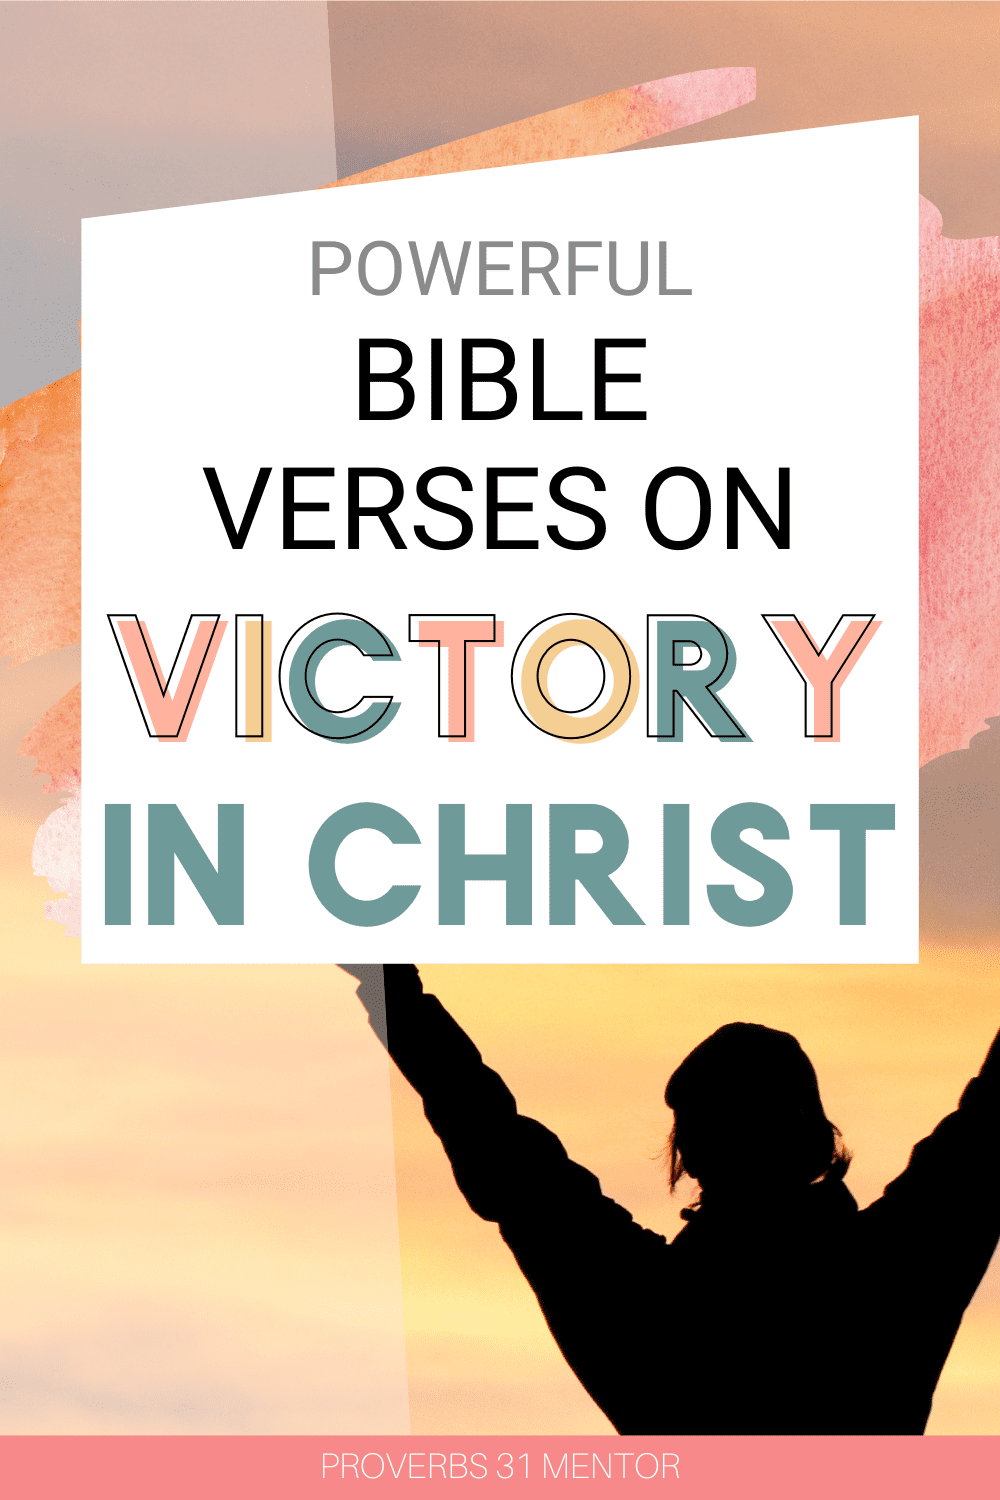 Title- Powerful Bible Verses on Victory in Christ Picture- woman with her arms raised celebrating victory in Christ